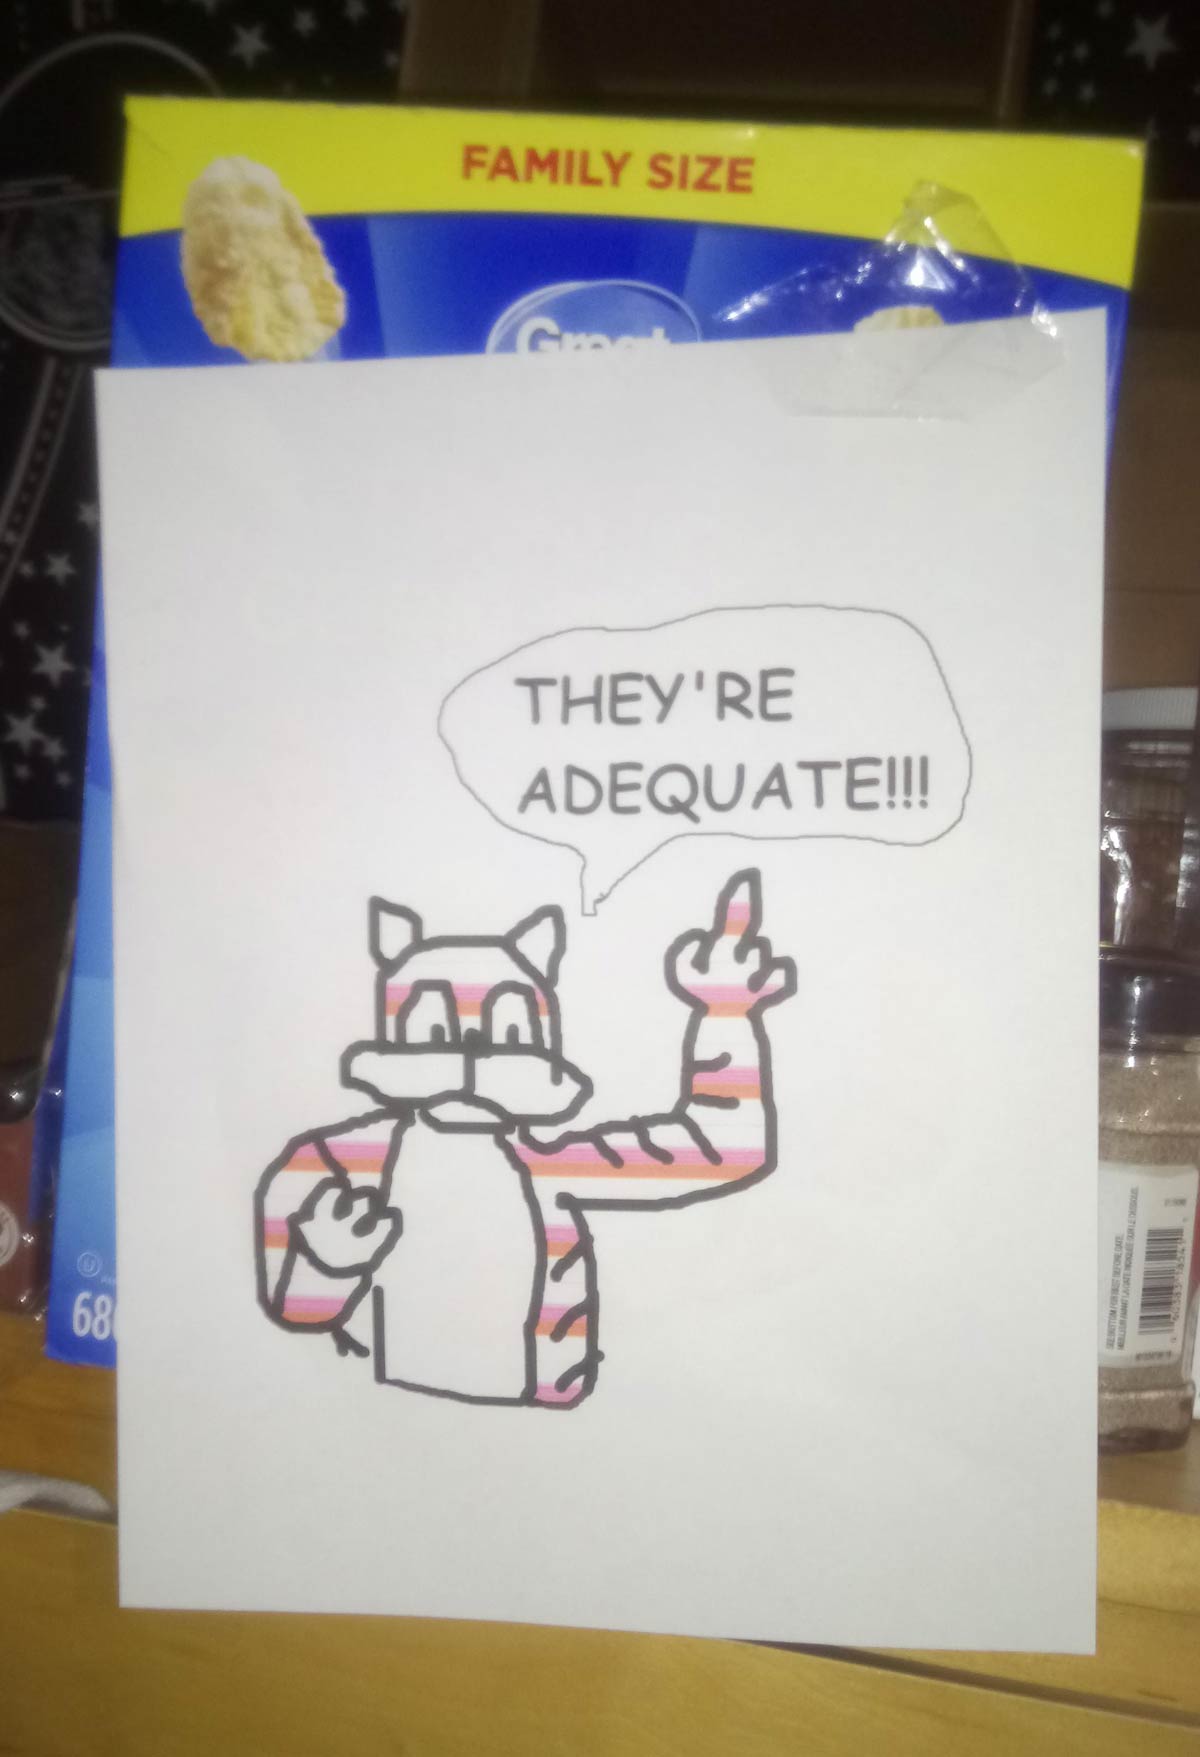 I bought an off-brand box of corn flakes cereal and my roommate sticks this picture he drew on the box